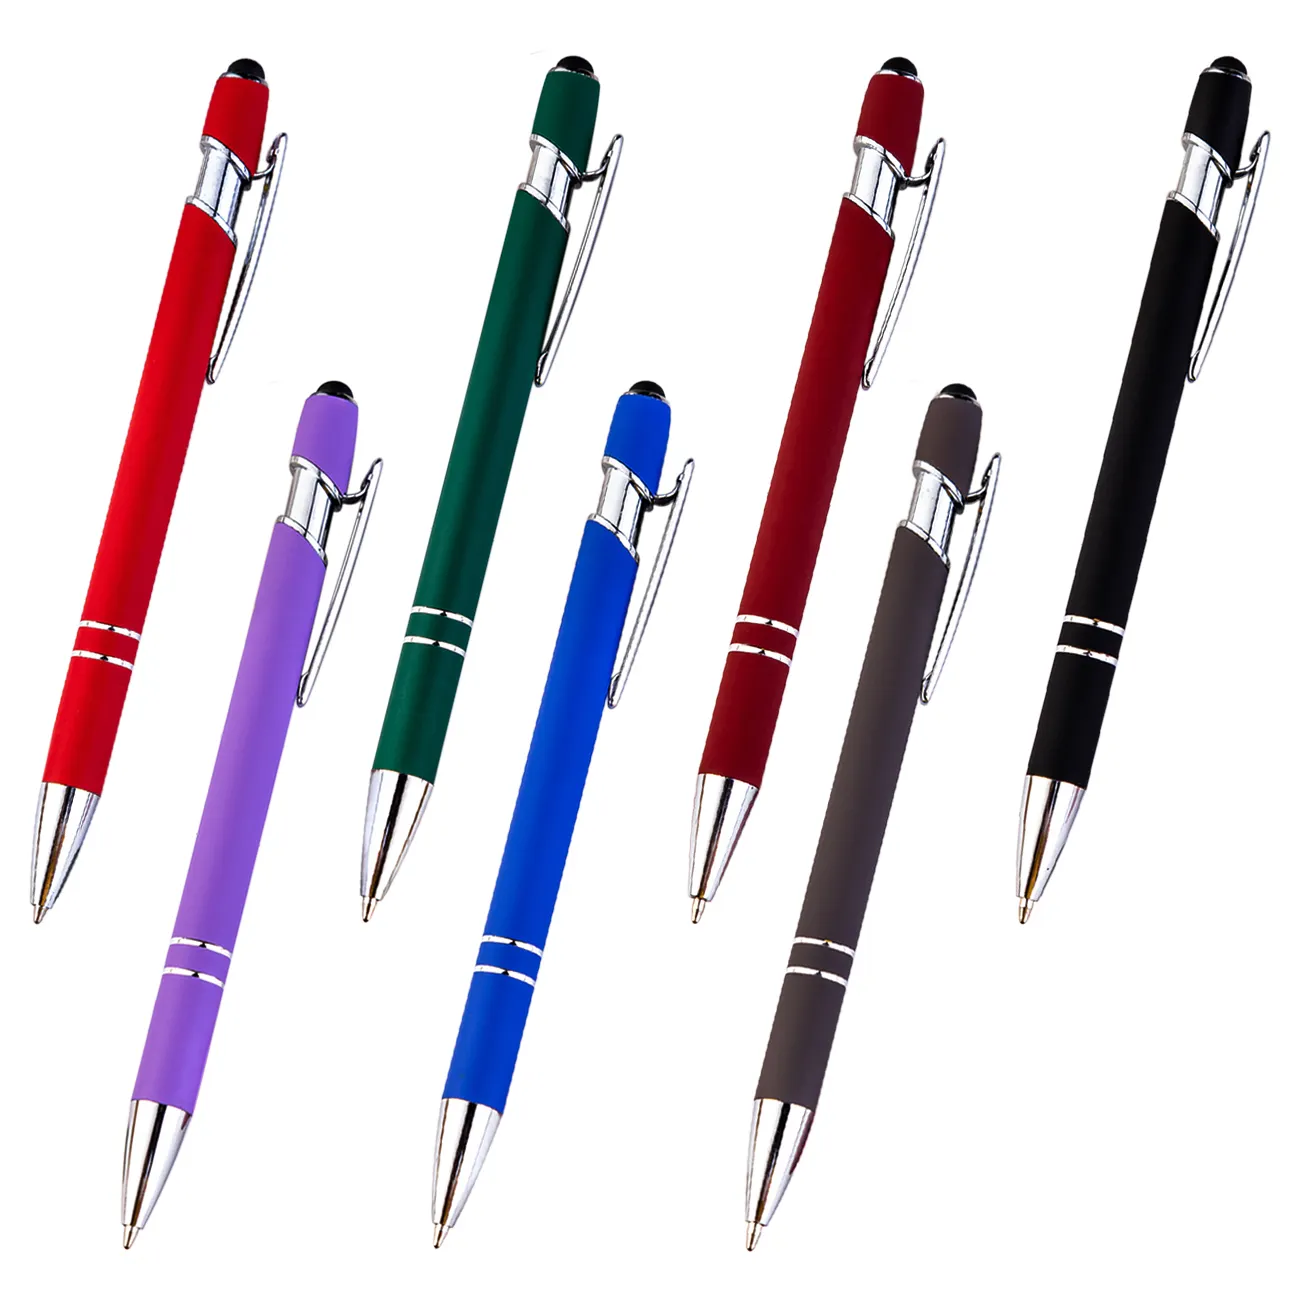 Xinghao Brand Promotional Ballpen Factory Office Business Hotel School Using Cheapest Ballpoint Pen with Customize Logo